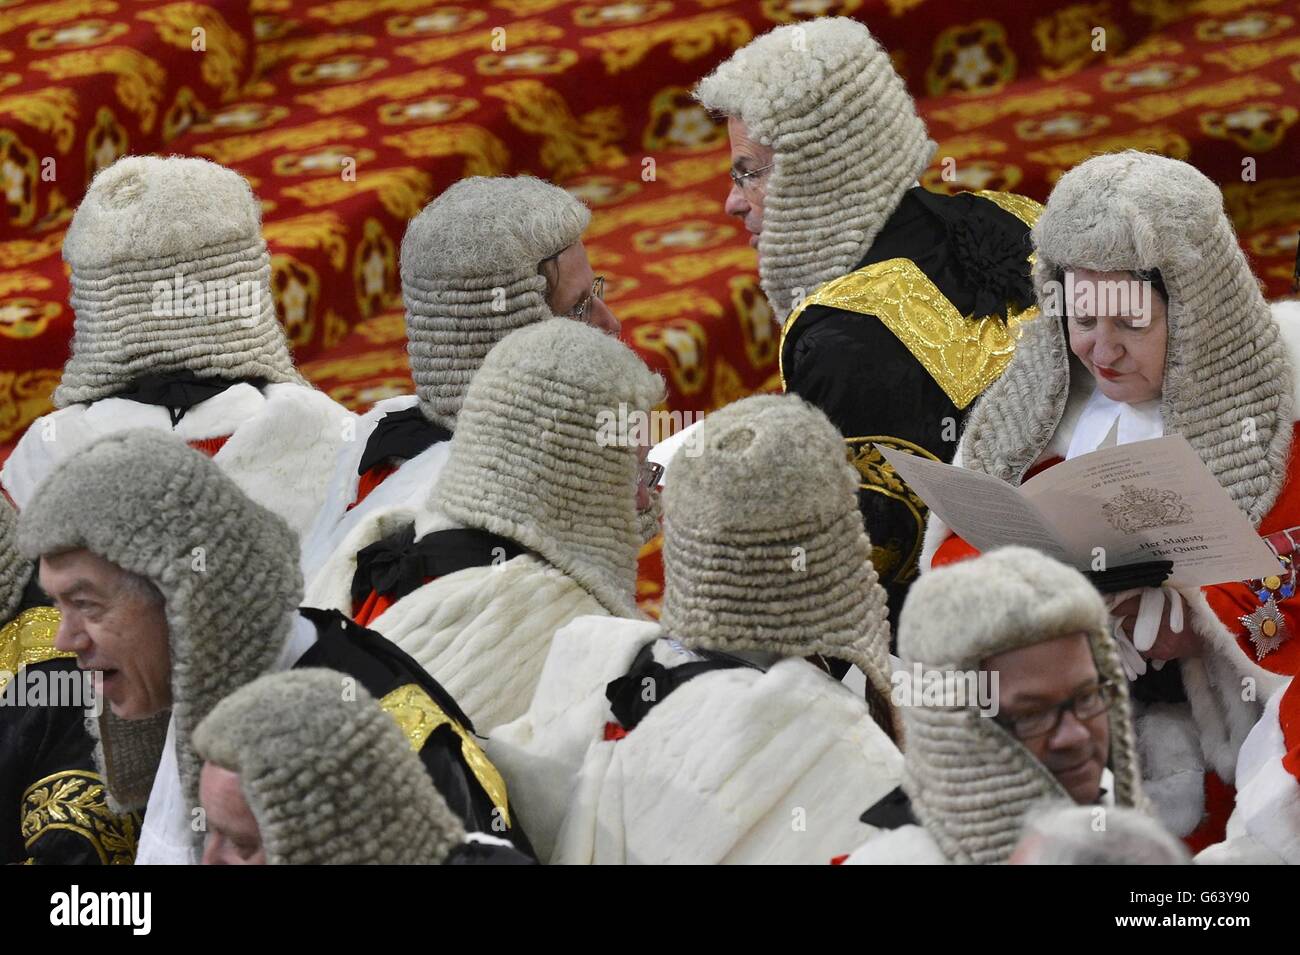 Judges sit in the House of Lords as they wait for the start of the State opening of Parliament, in the Palace of Westminster in London. Stock Photo